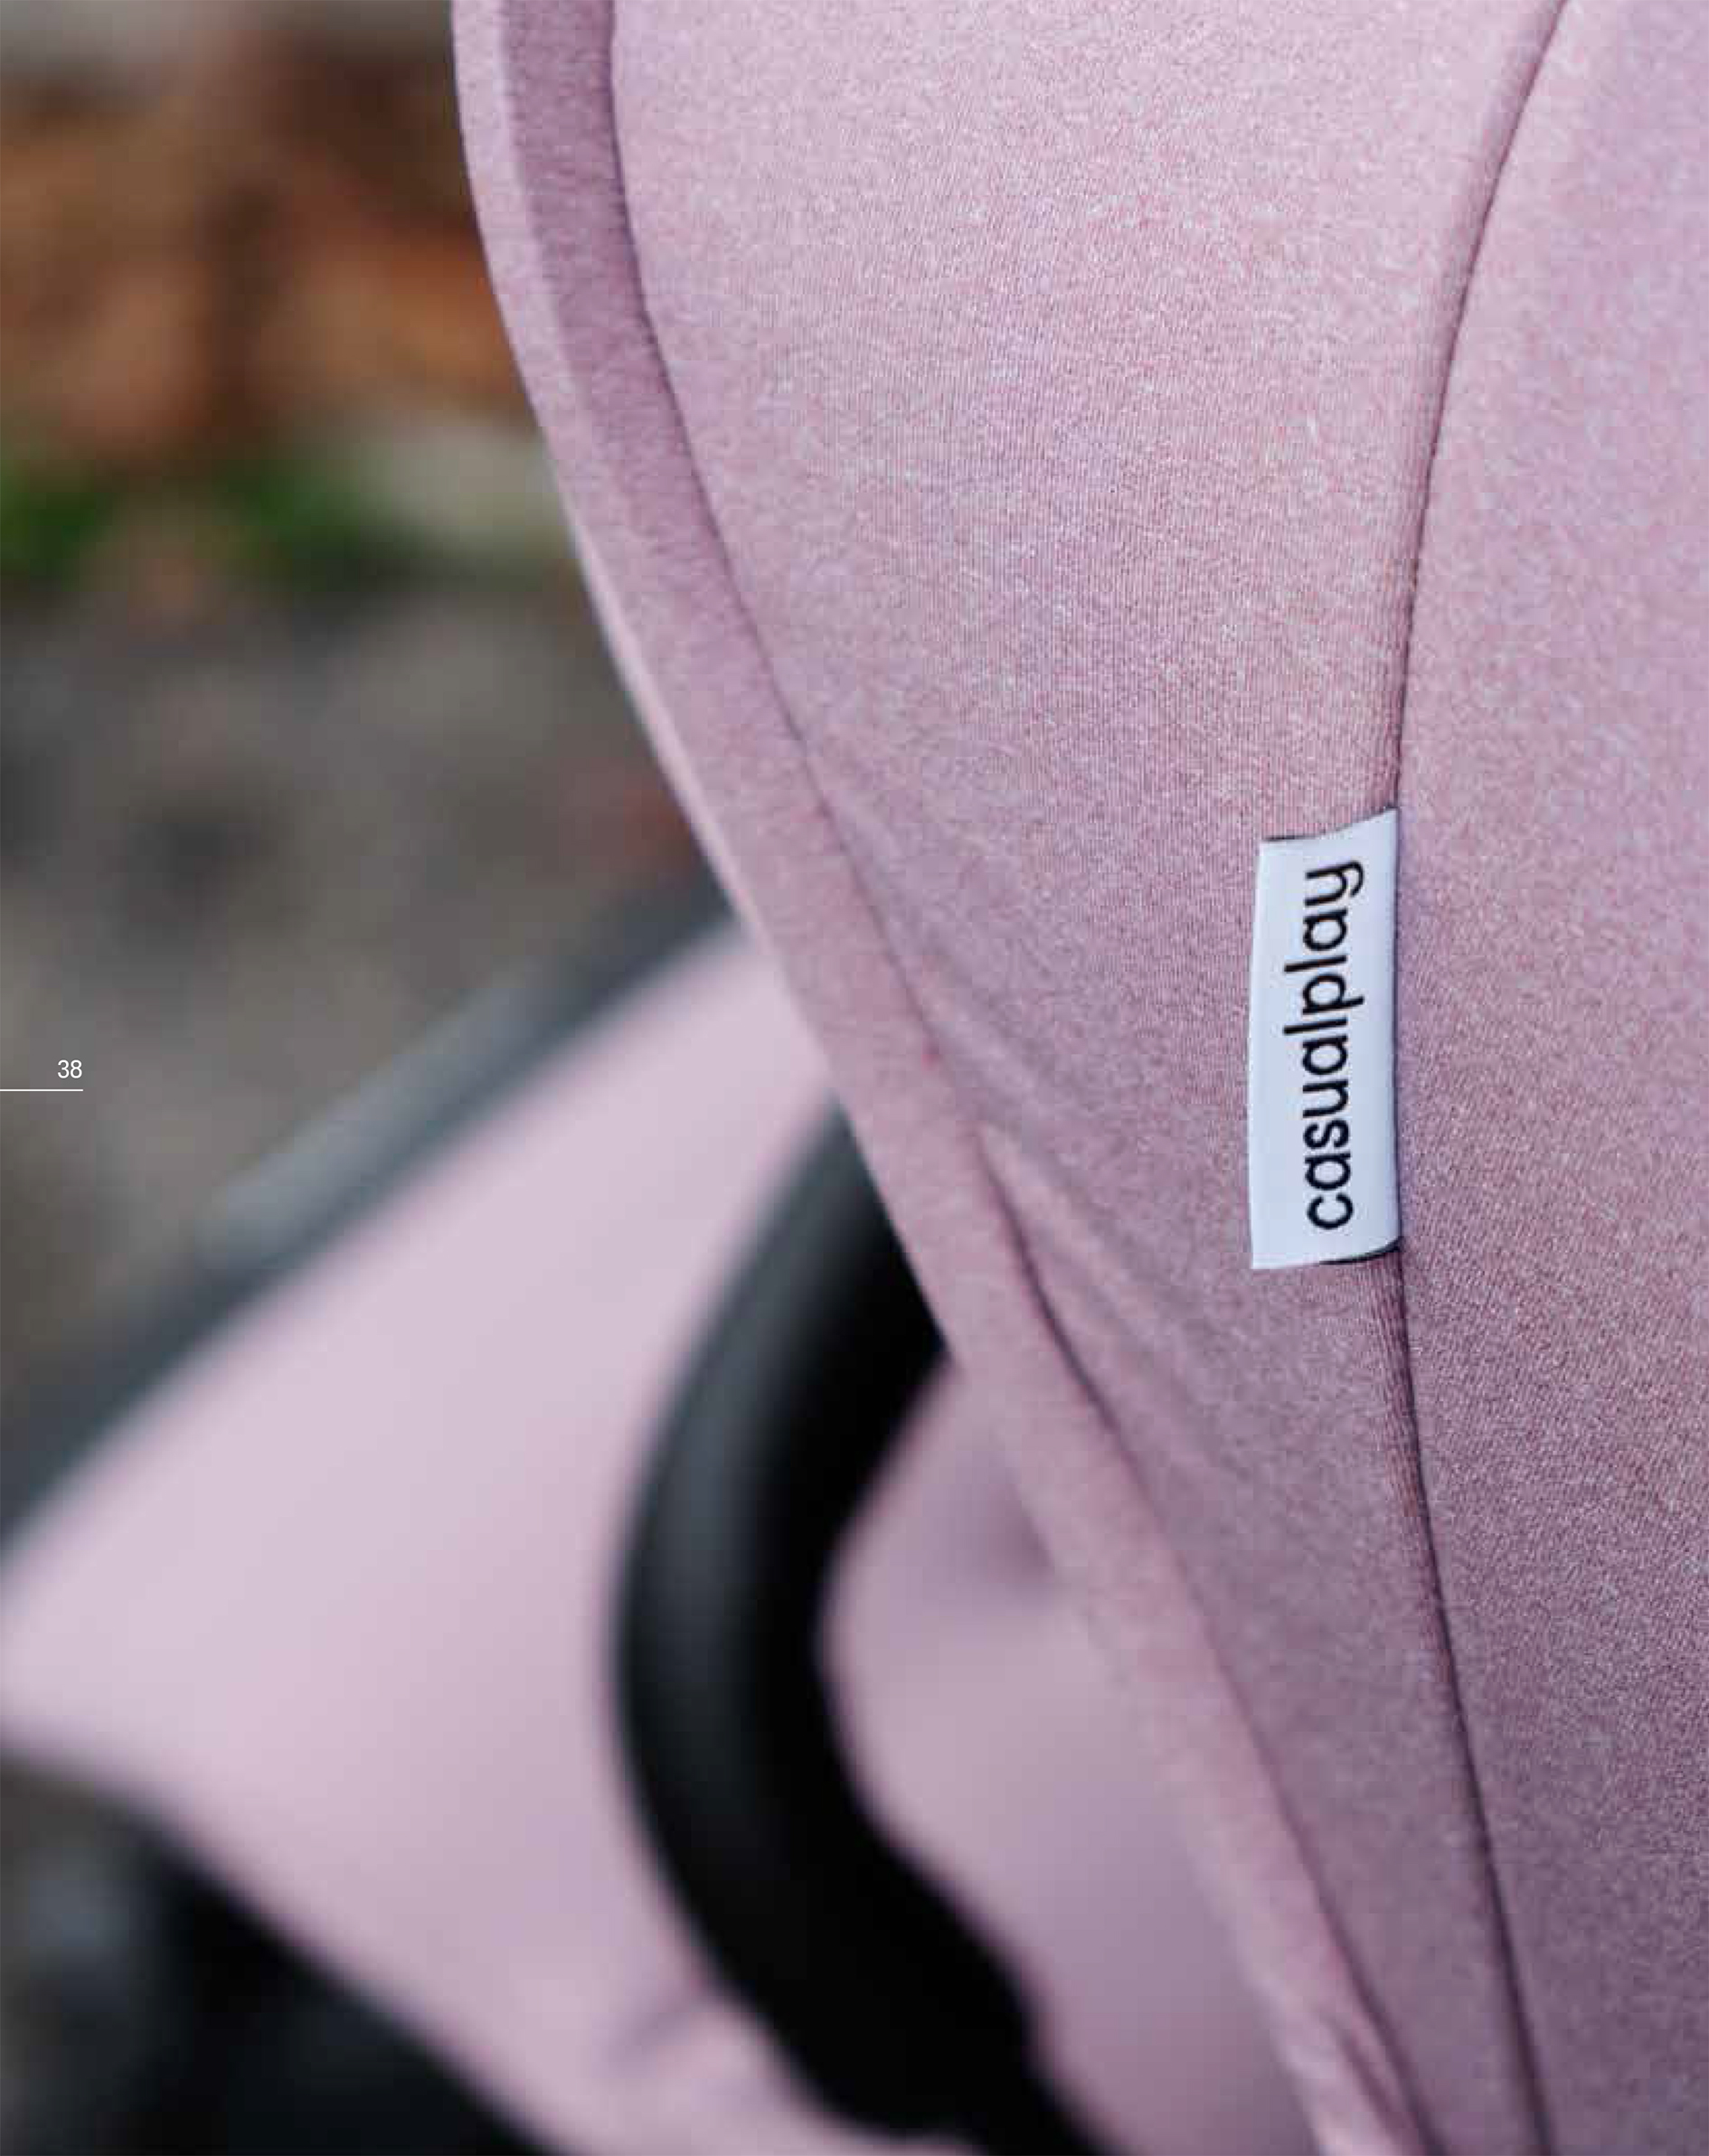 Coche gemelar TOUR TWIN MAX con 2 capazos MISTY PINK